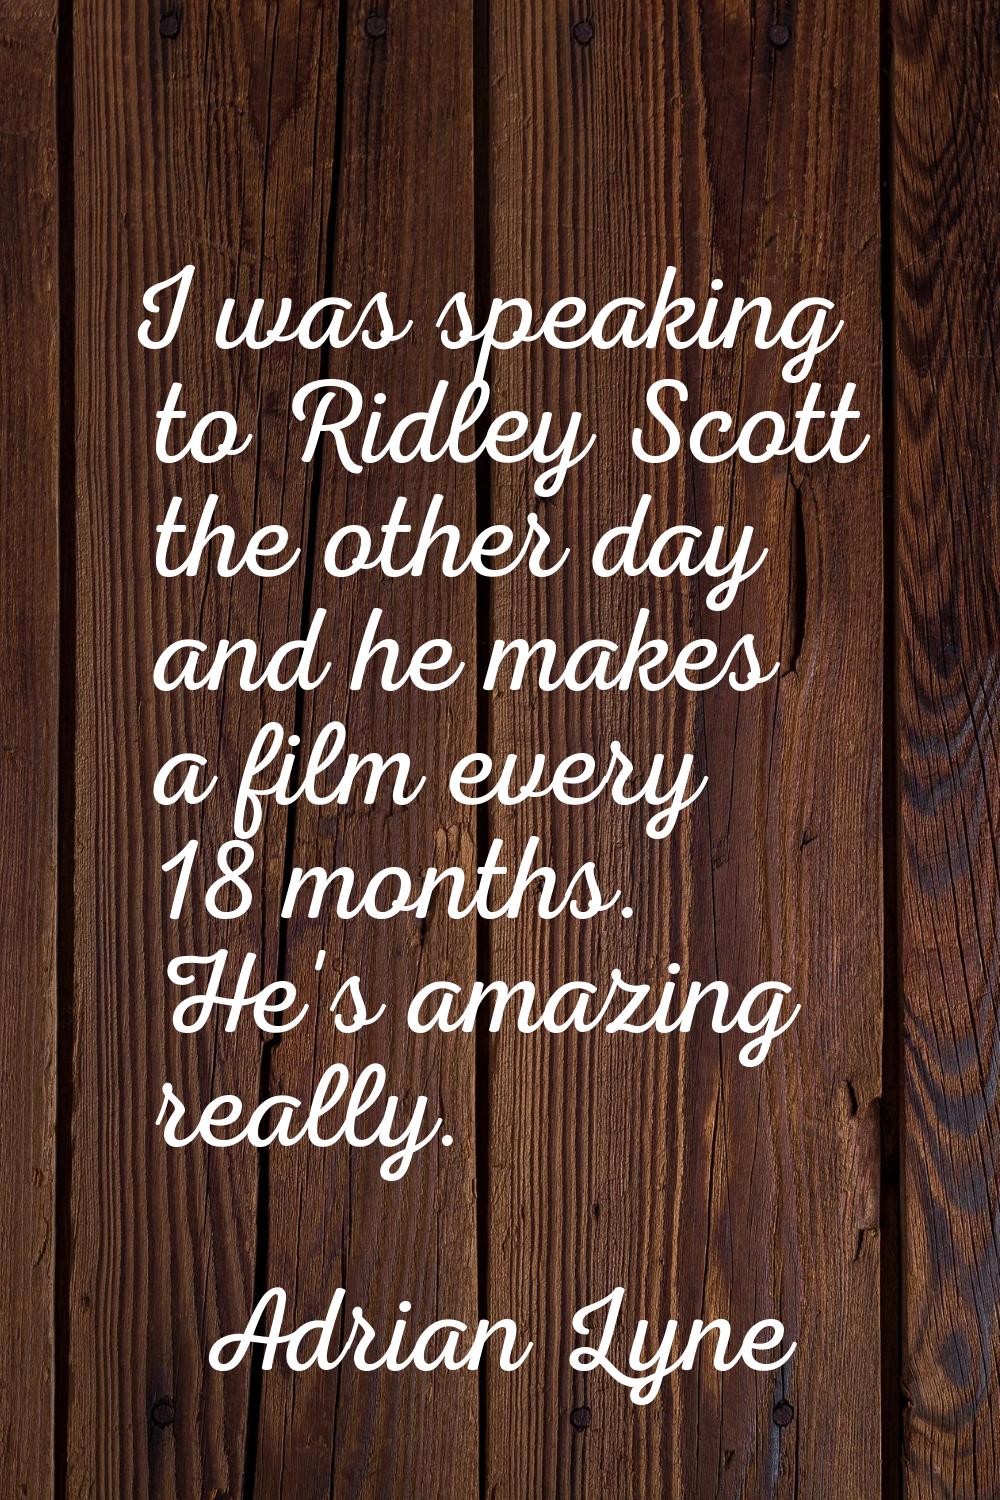 I was speaking to Ridley Scott the other day and he makes a film every 18 months. He's amazing real